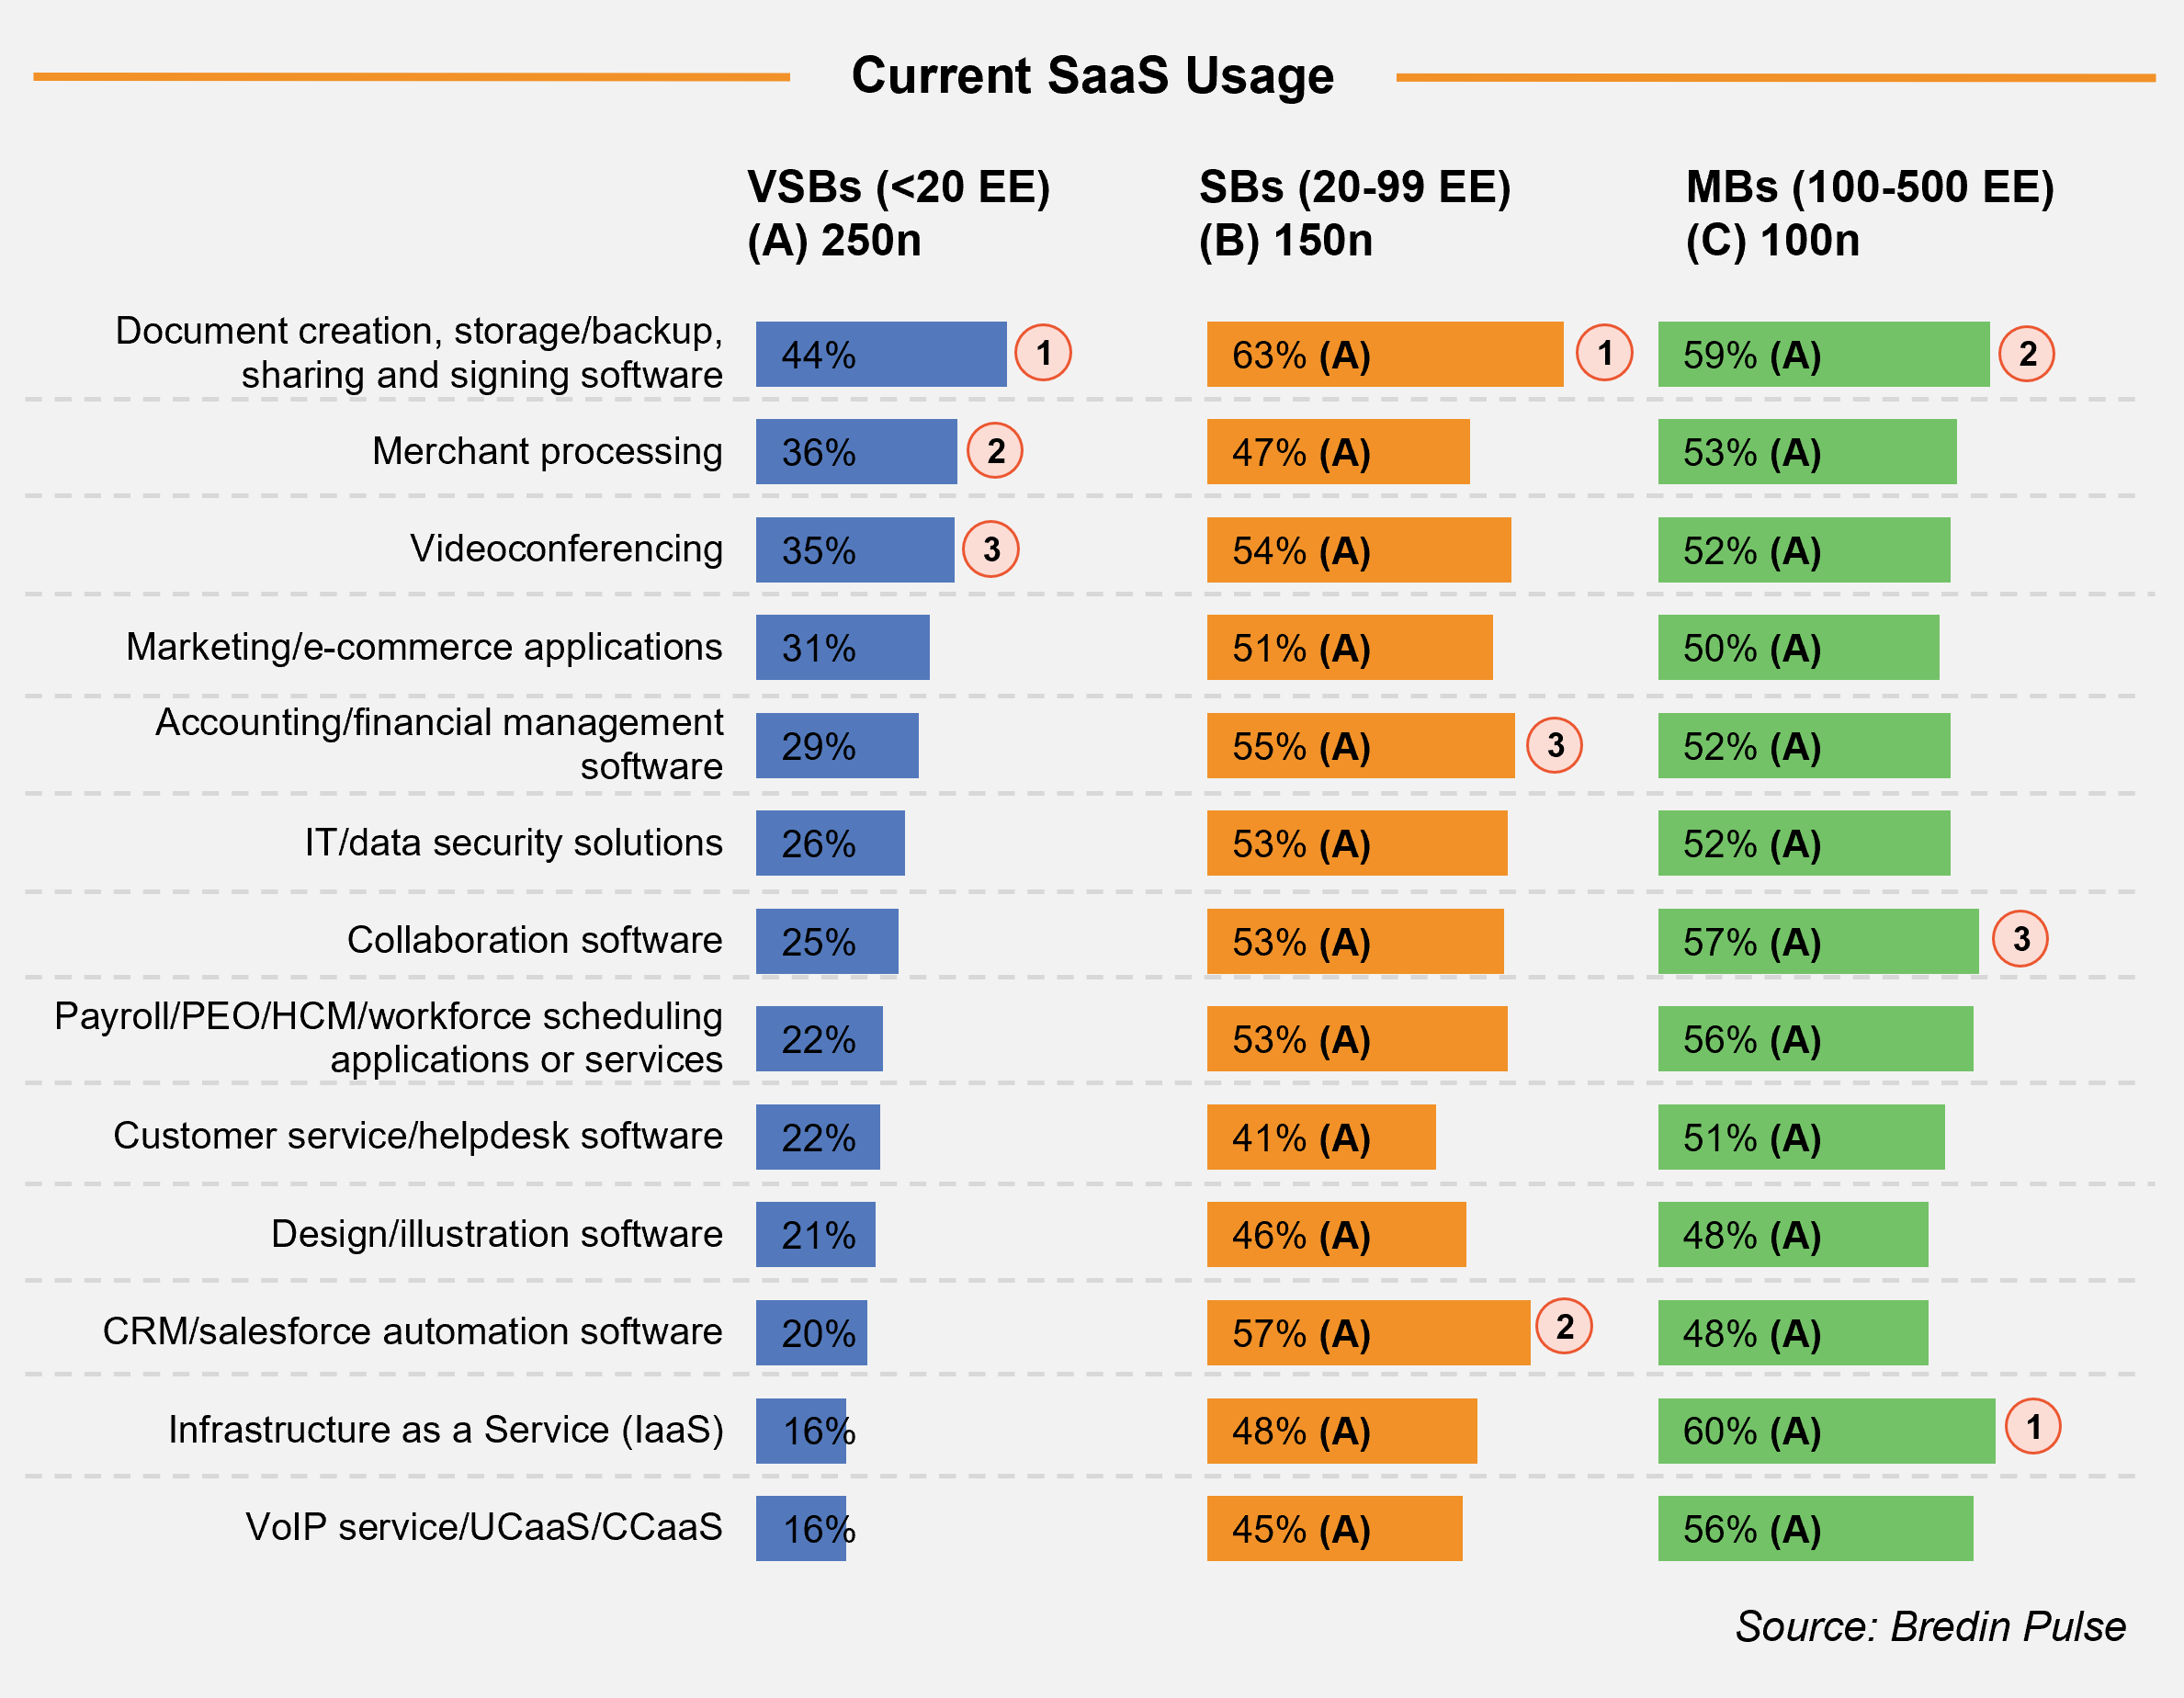 Current SaaS Usage by company size